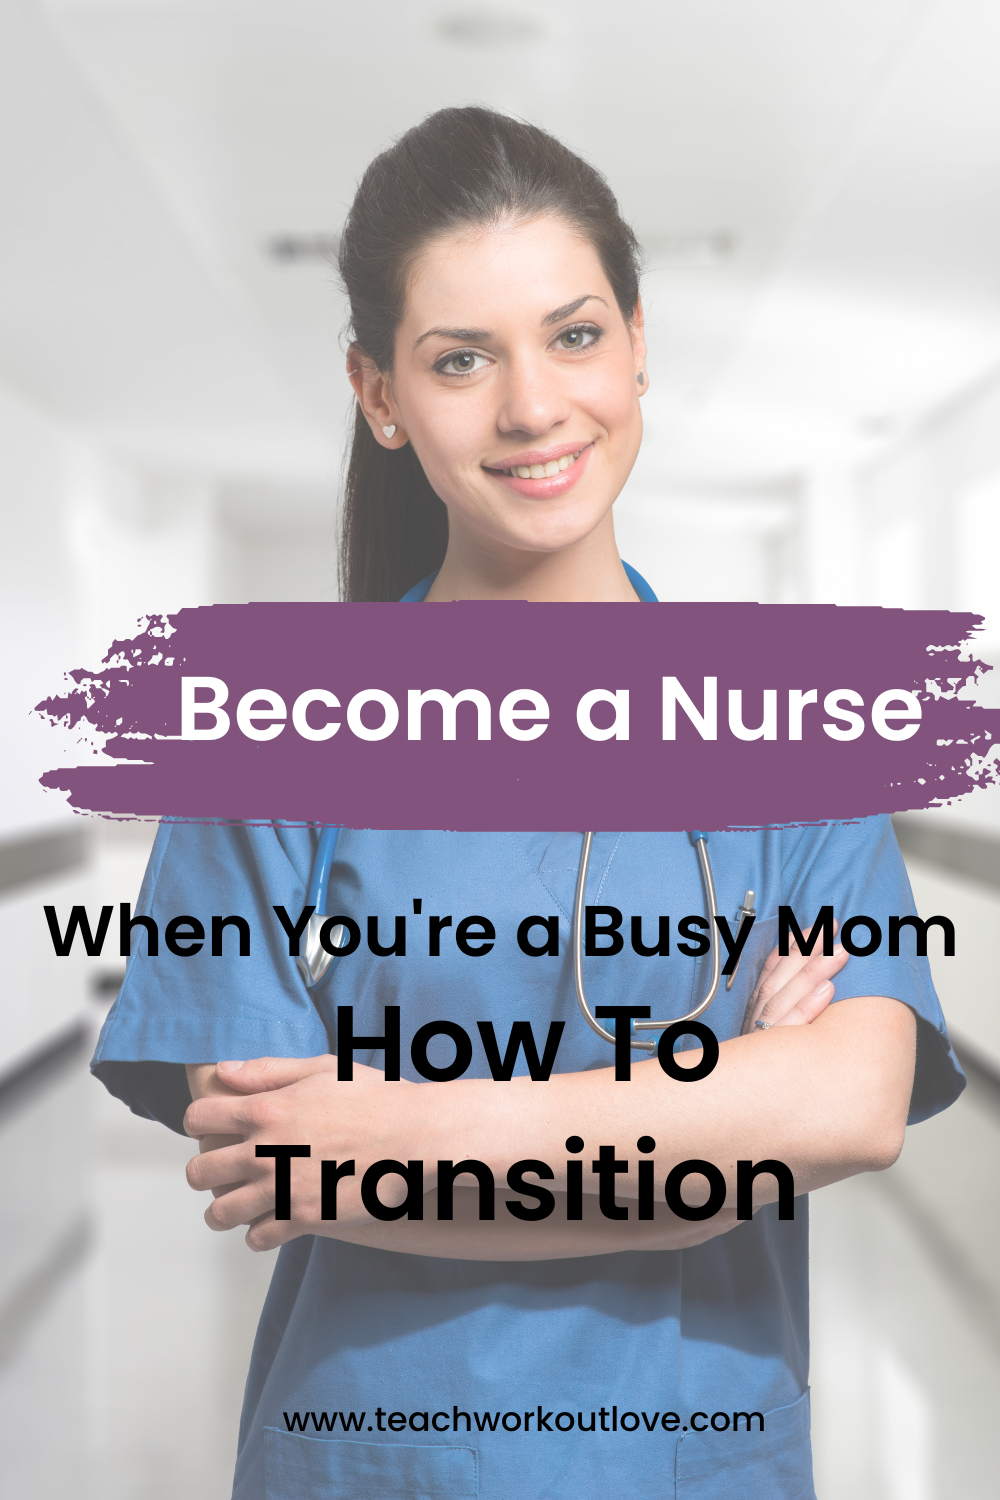 The good news is that you don’t necessarily have to wait to become a nurse until your kids are out of the house. It is possible to become a nurse as a busy mother, with some planning and effective time management. Here are some tips for a smooth transition. 